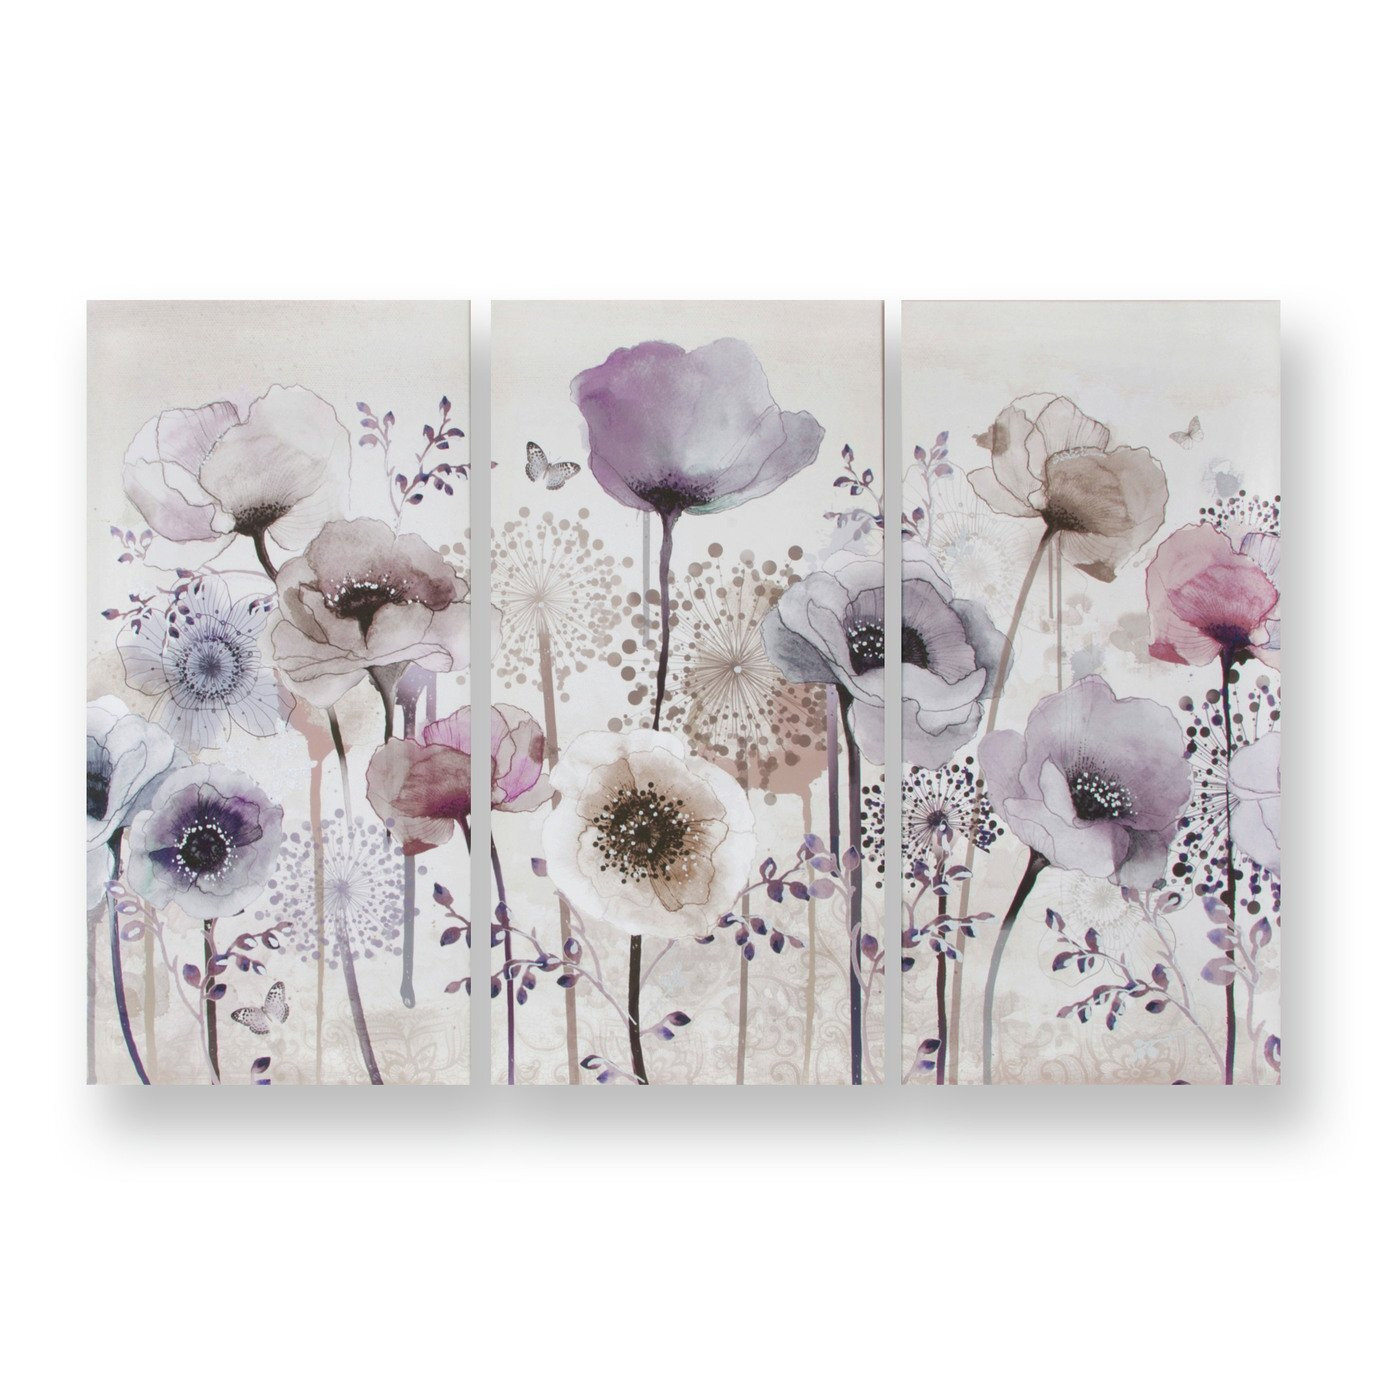 Art for the Home Classic Poppy Canvas Gallery Set - 30x60cm - image 1